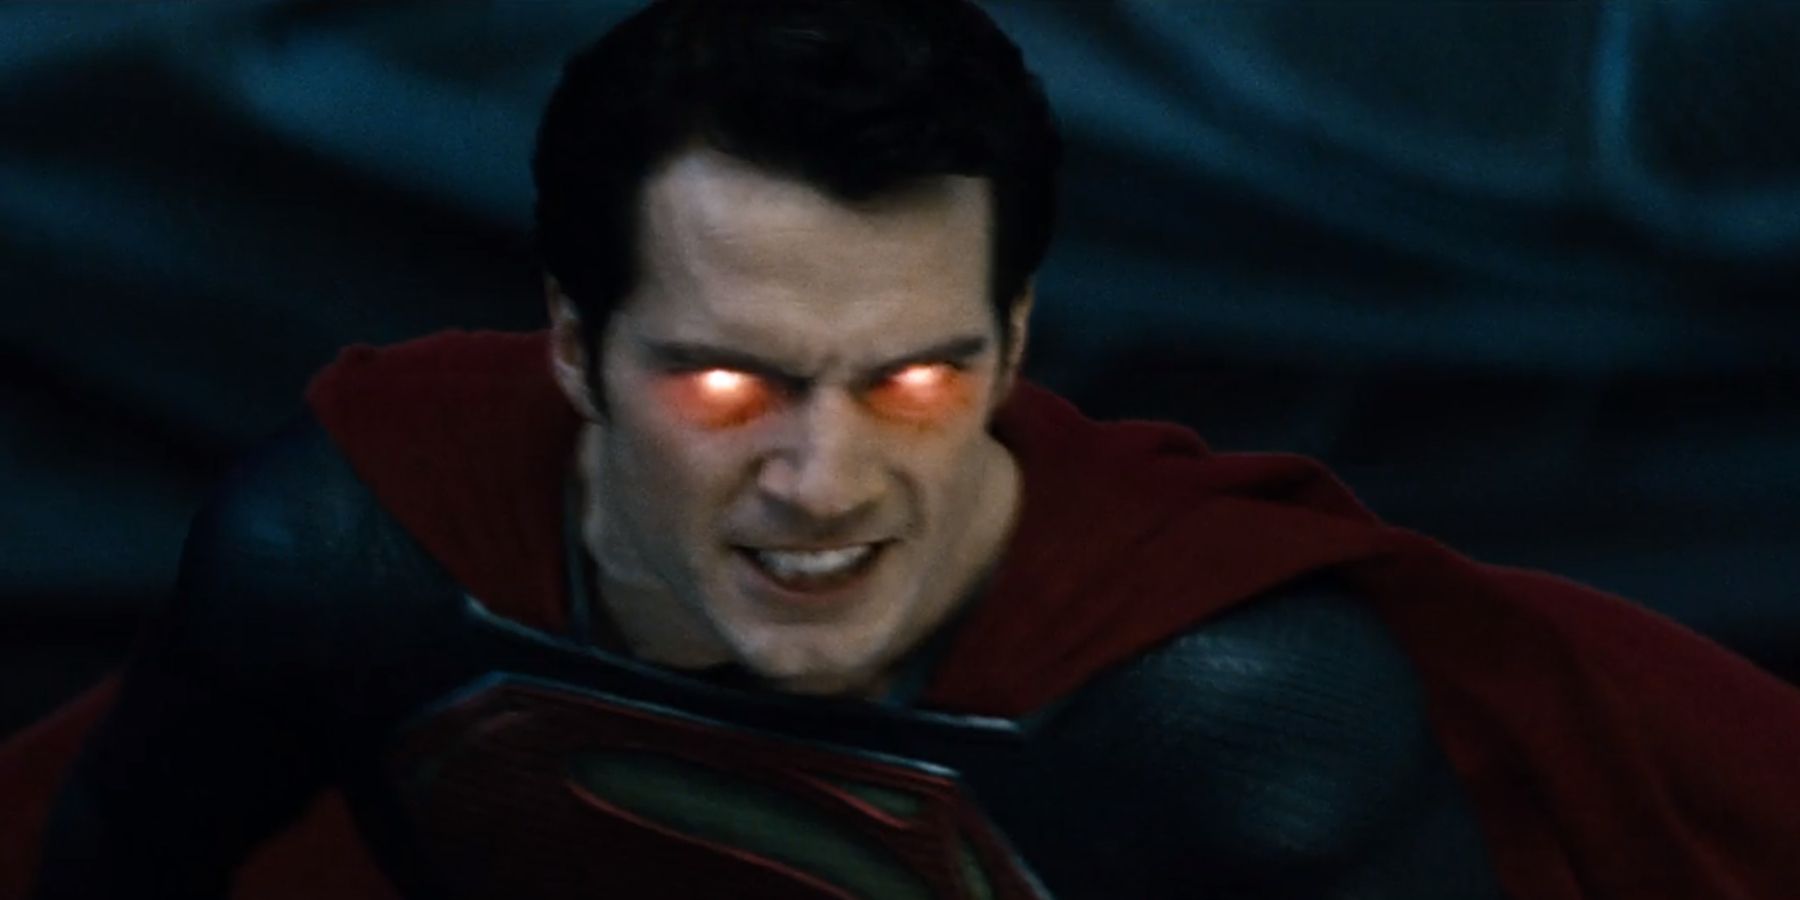 Superman readying his heat vision in the scoutship in Man Of Steel